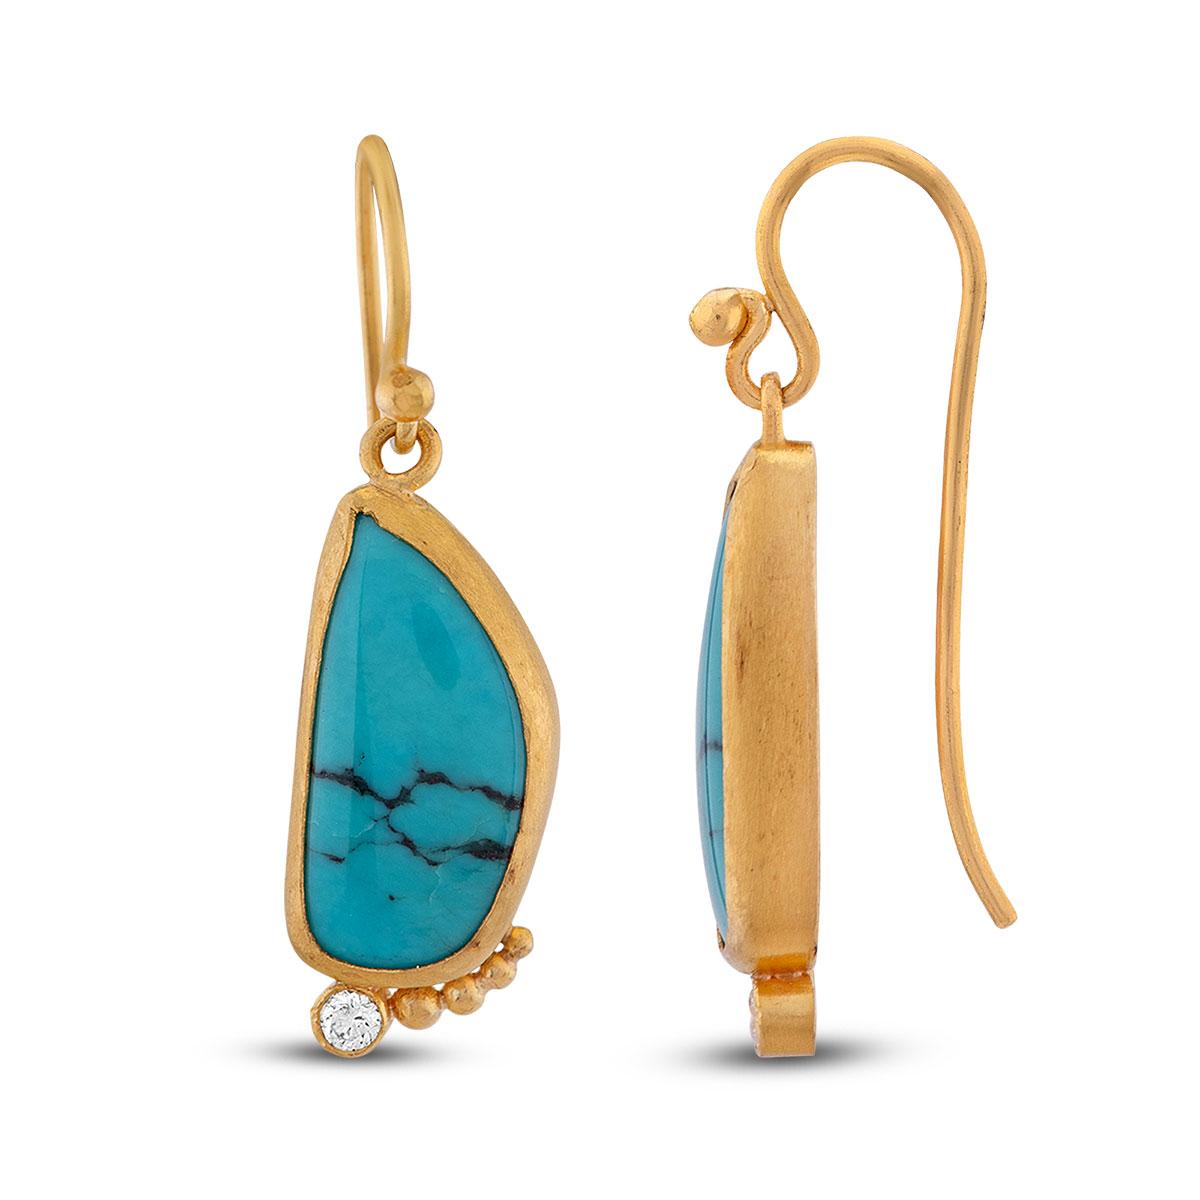 Turquoise Earrings with Diamond and Granulation